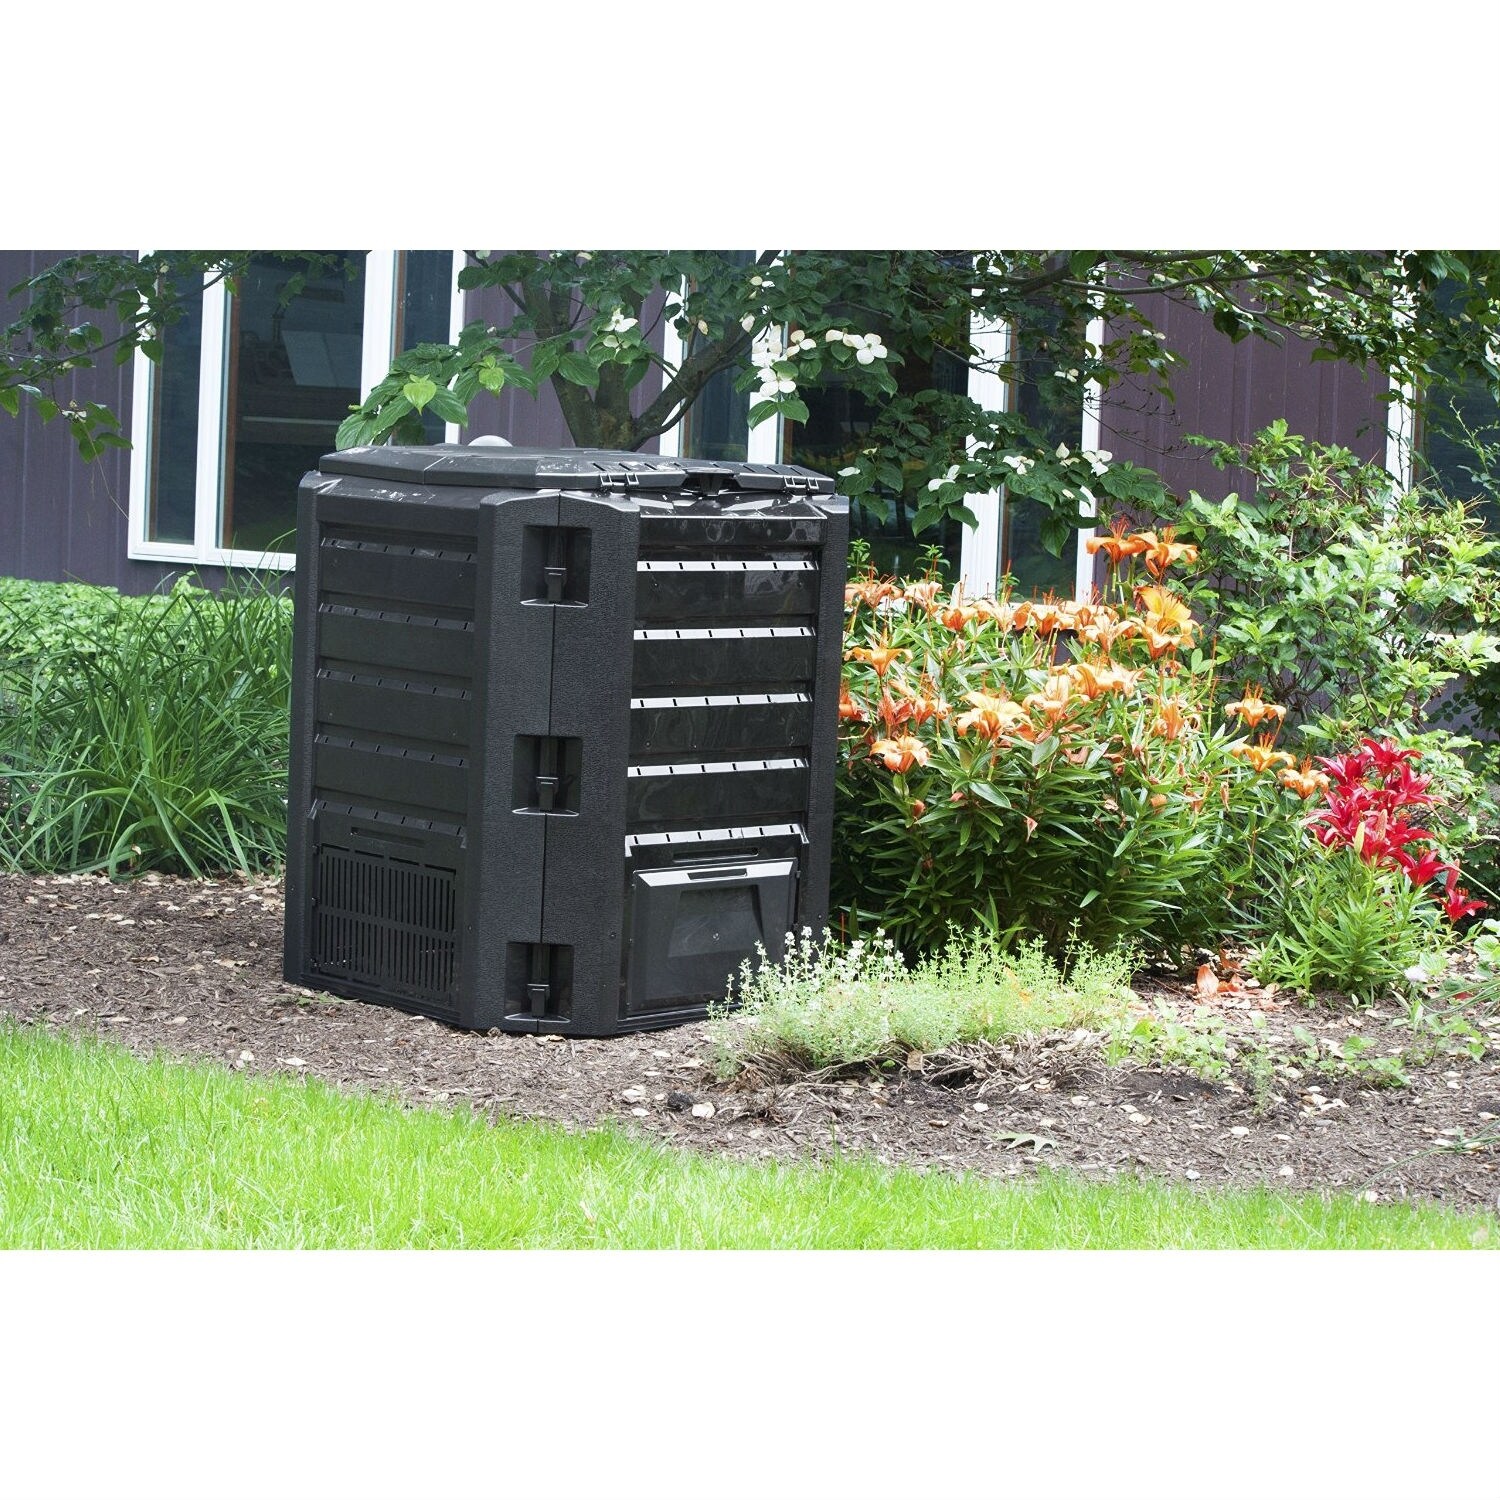 Outsunny 120 Gallon Compost Bin, Large Composter with 80 Vents, Black